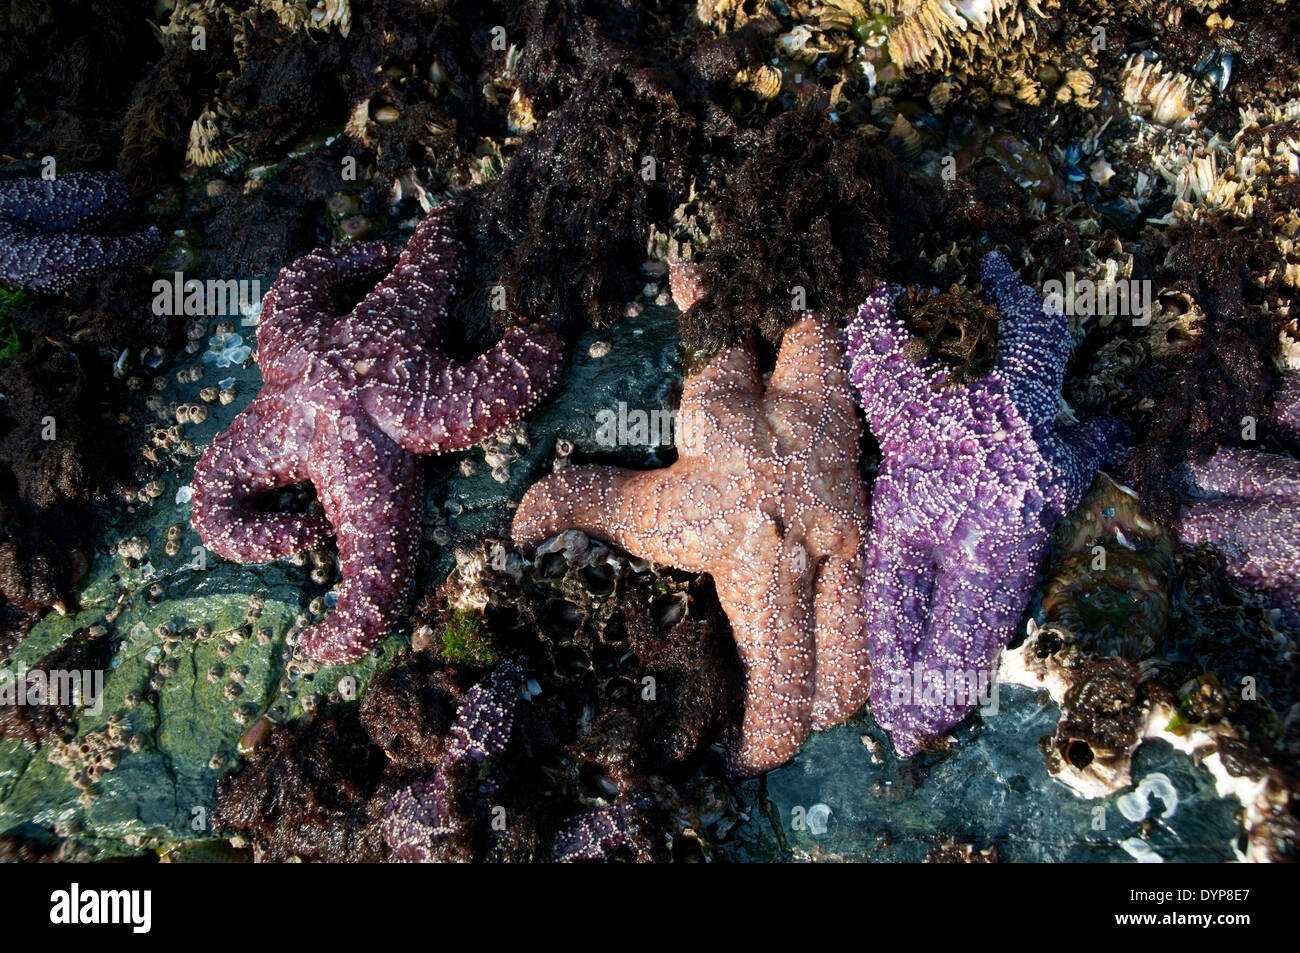 A group of colourful starfish on barnacle covered rocks in a Pacific Ocean intertidal zone in the Great Bear Rainforest, British Columbia, Canada. Stock Photo